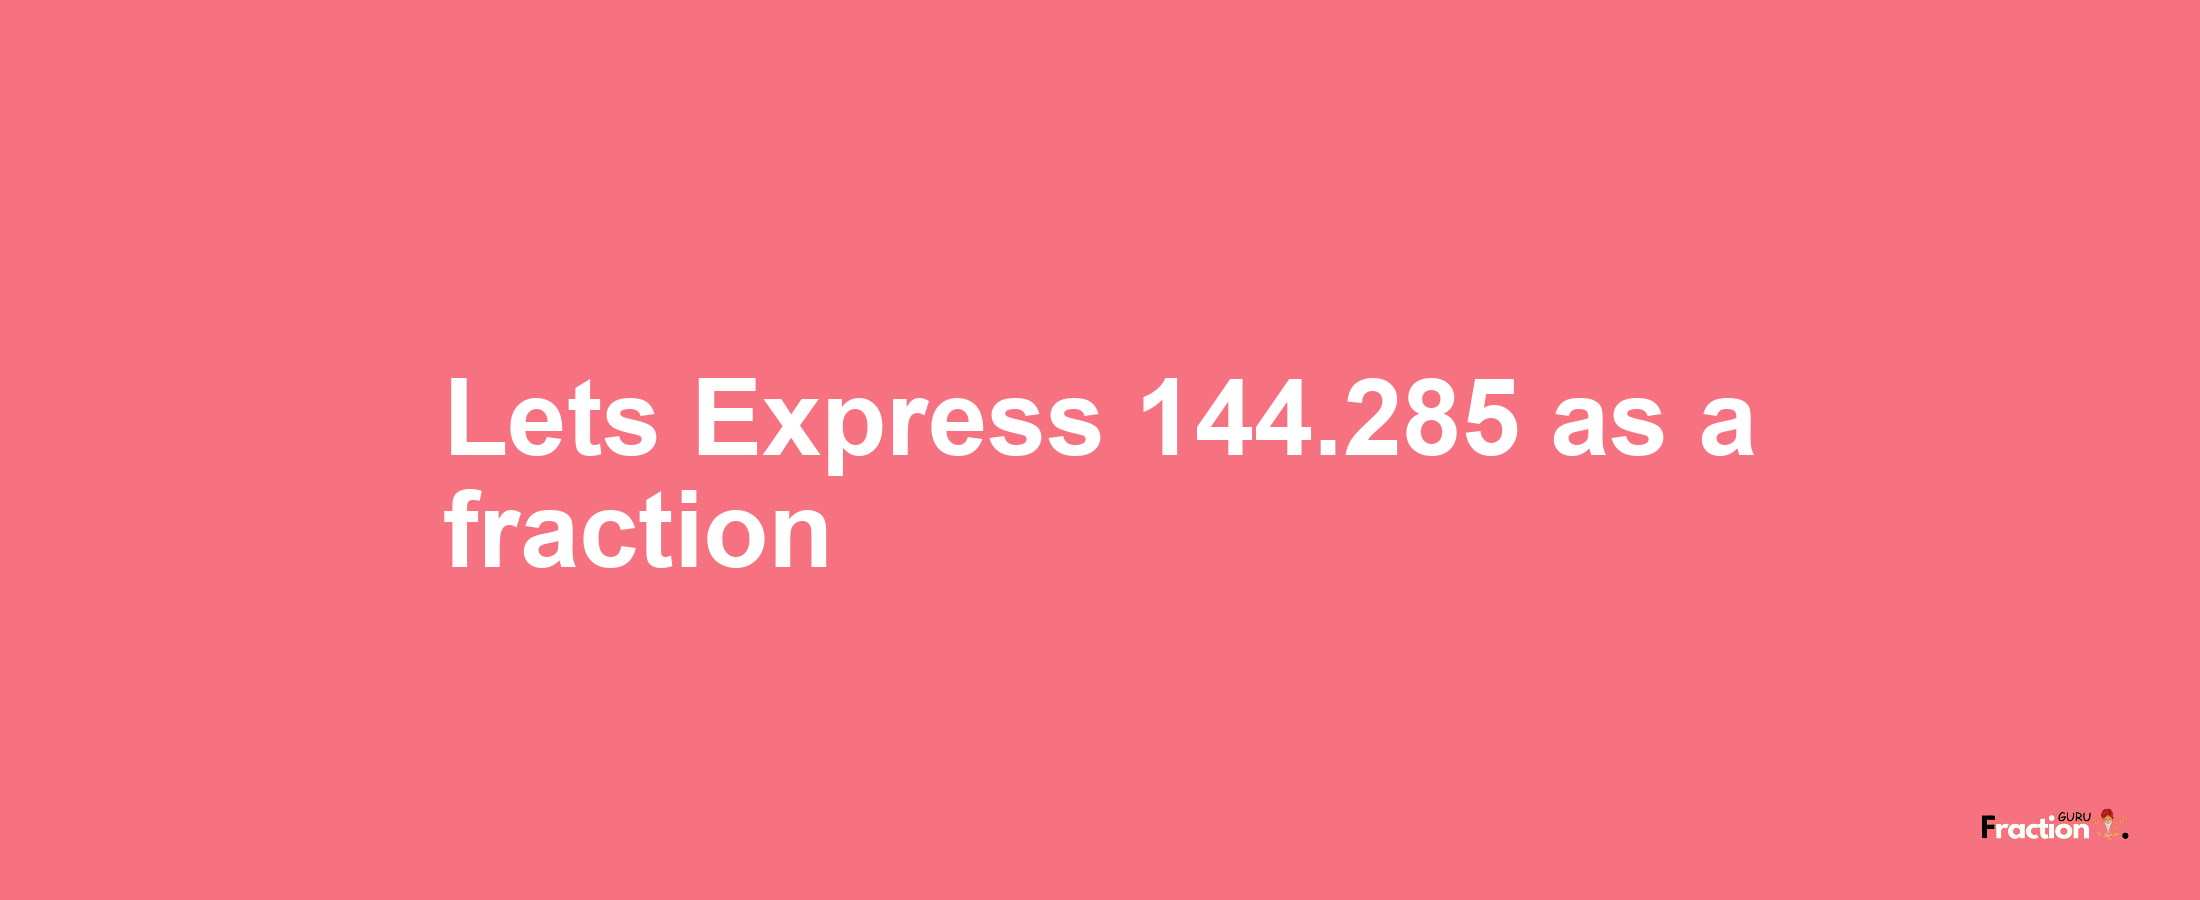 Lets Express 144.285 as afraction